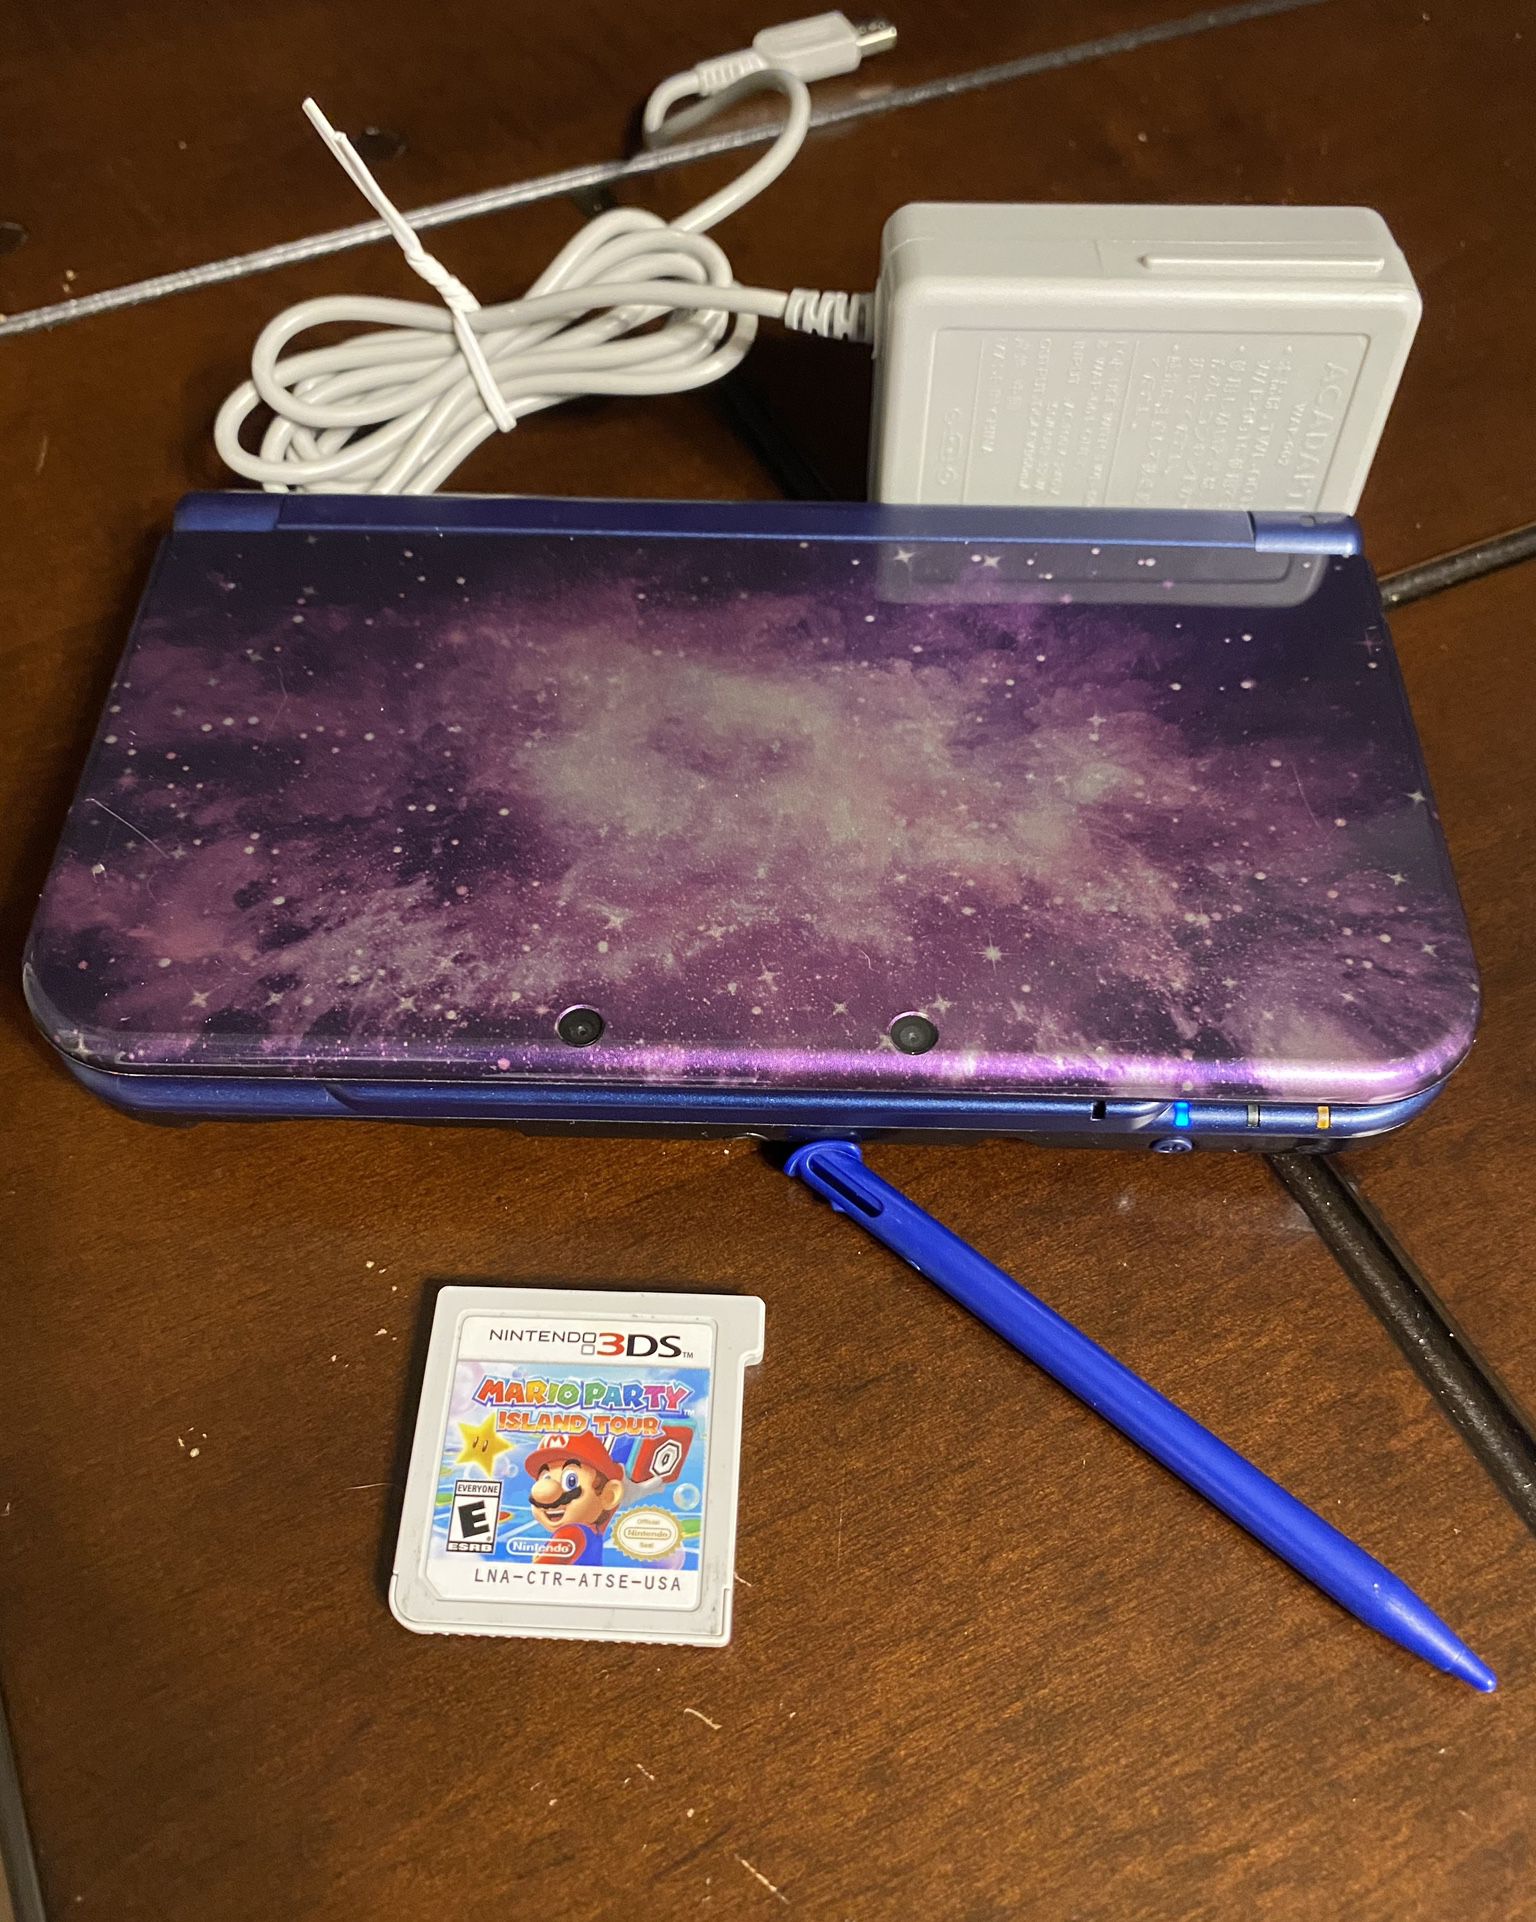 Nintendo 3DS XL Galaxy Style Limited Edition Handheld System